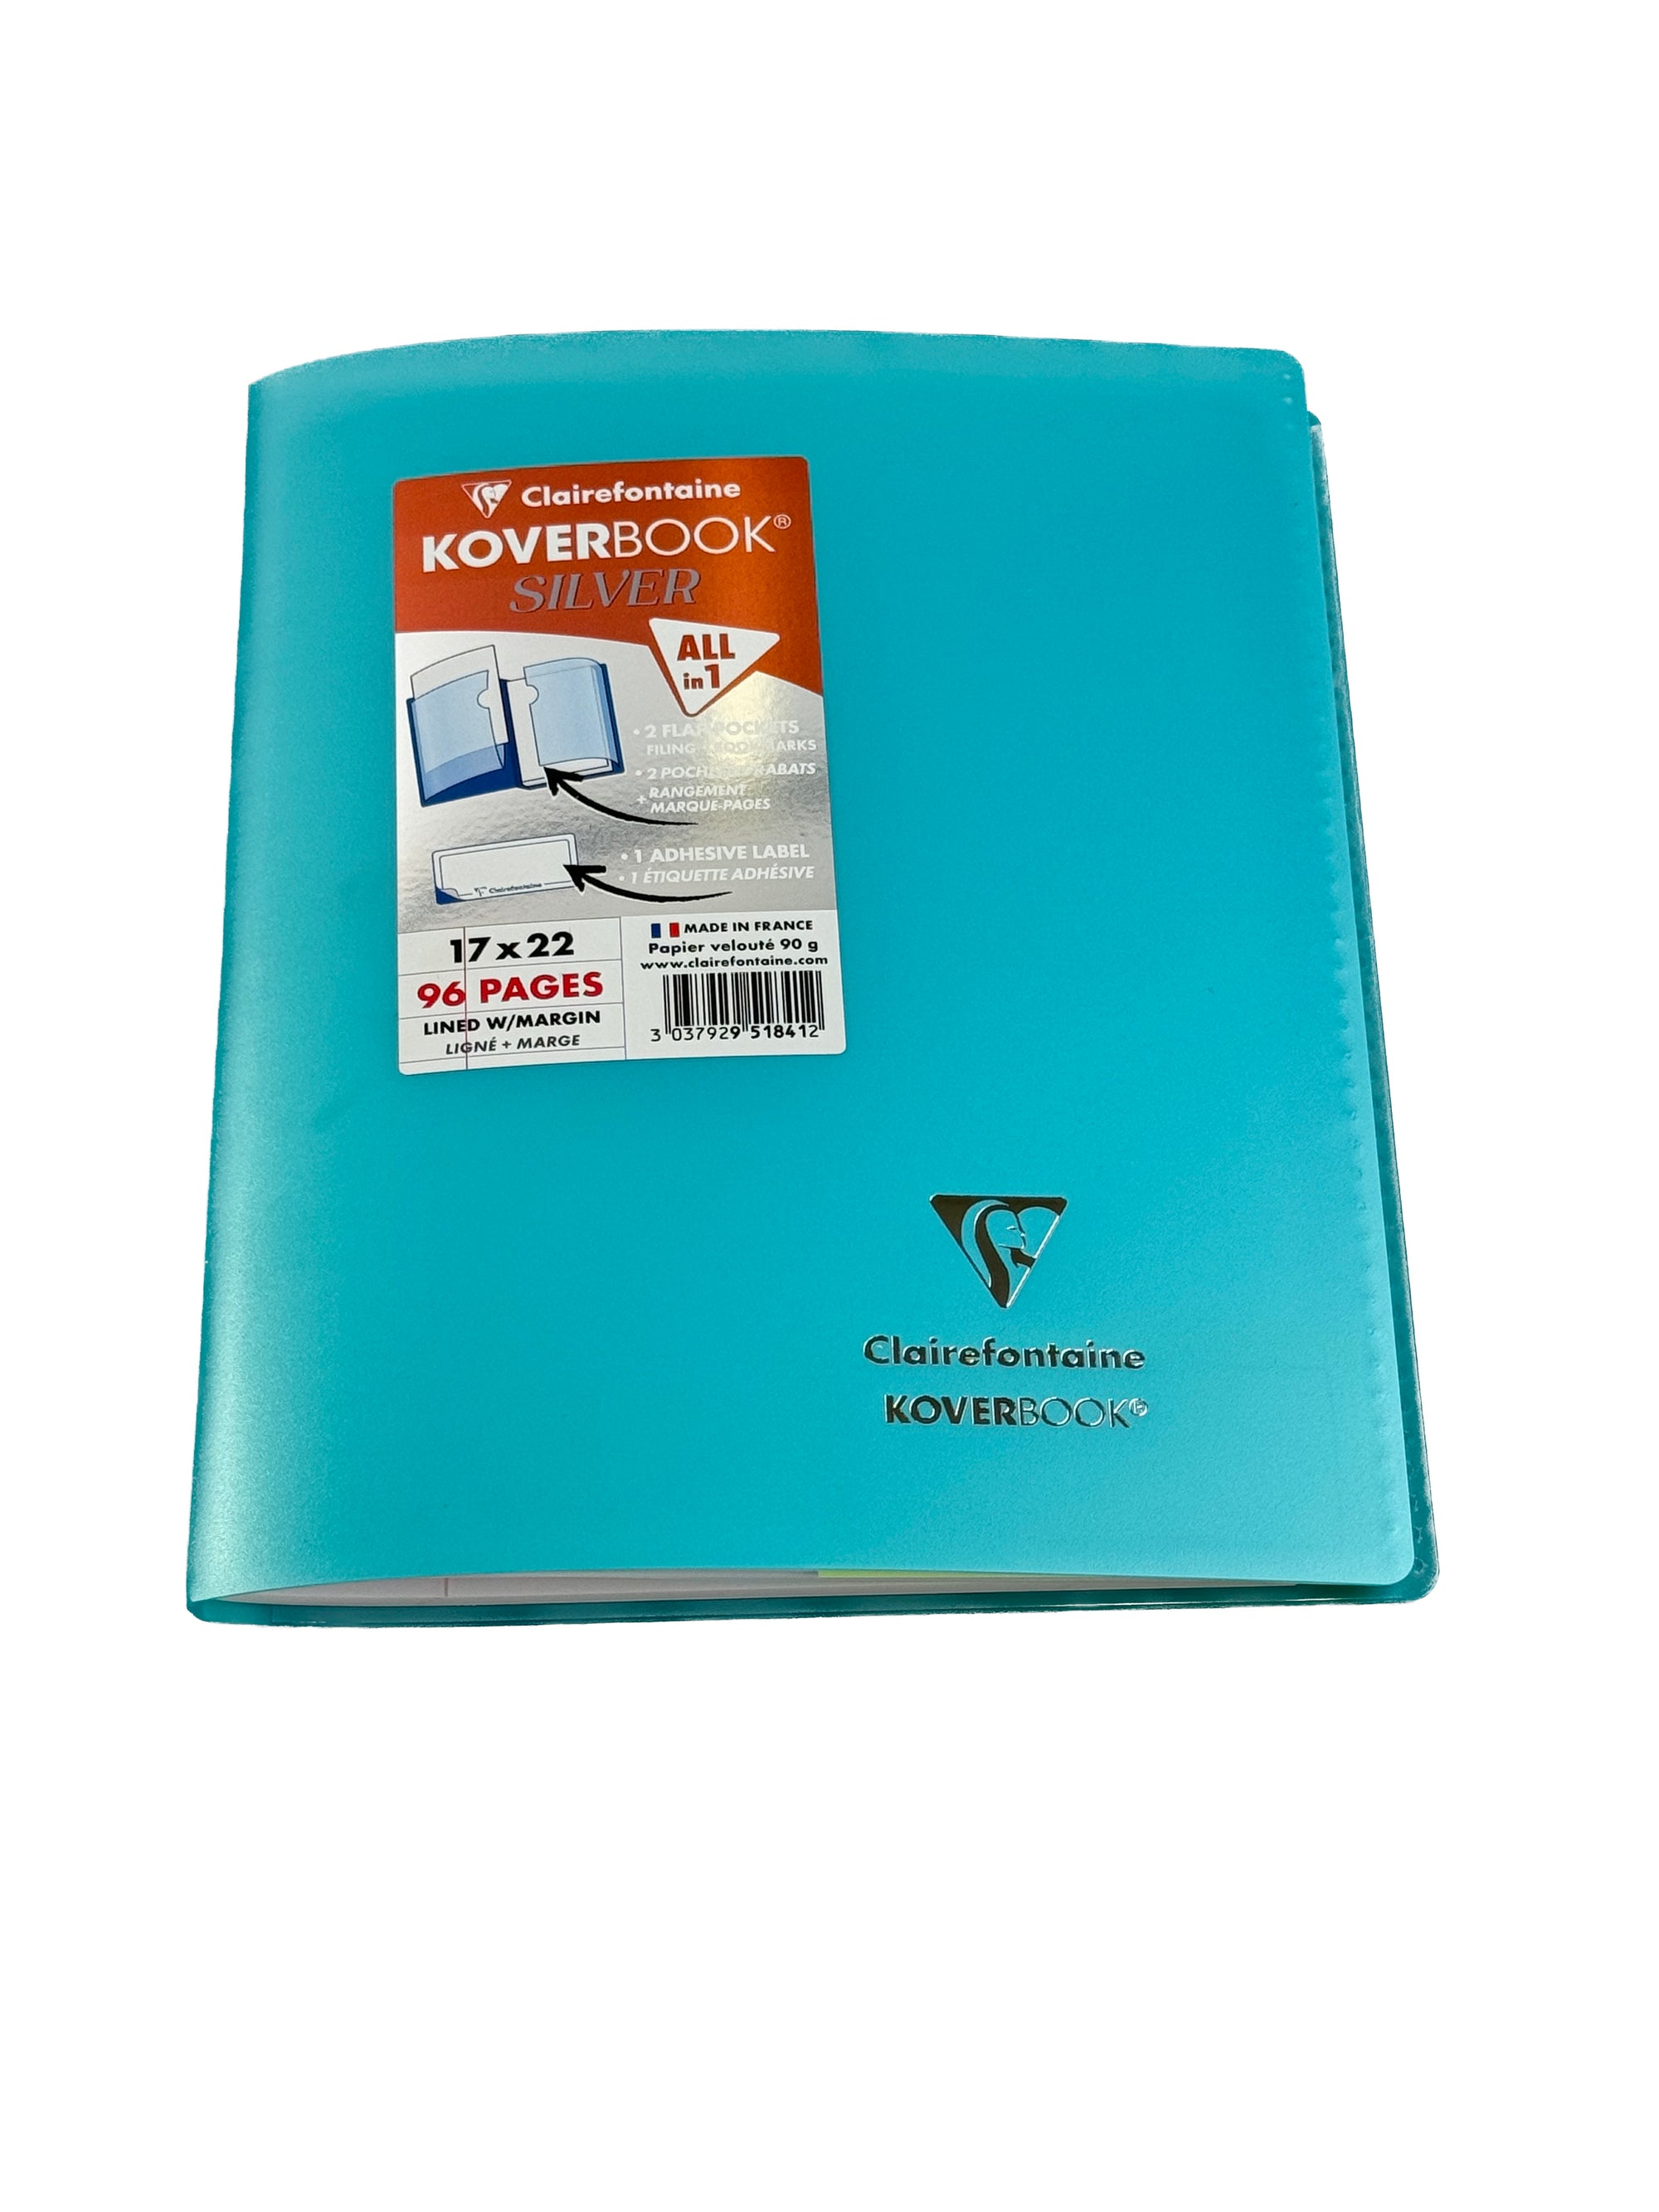 Clairefontaine Koverbook Silver Notebook - All in 1